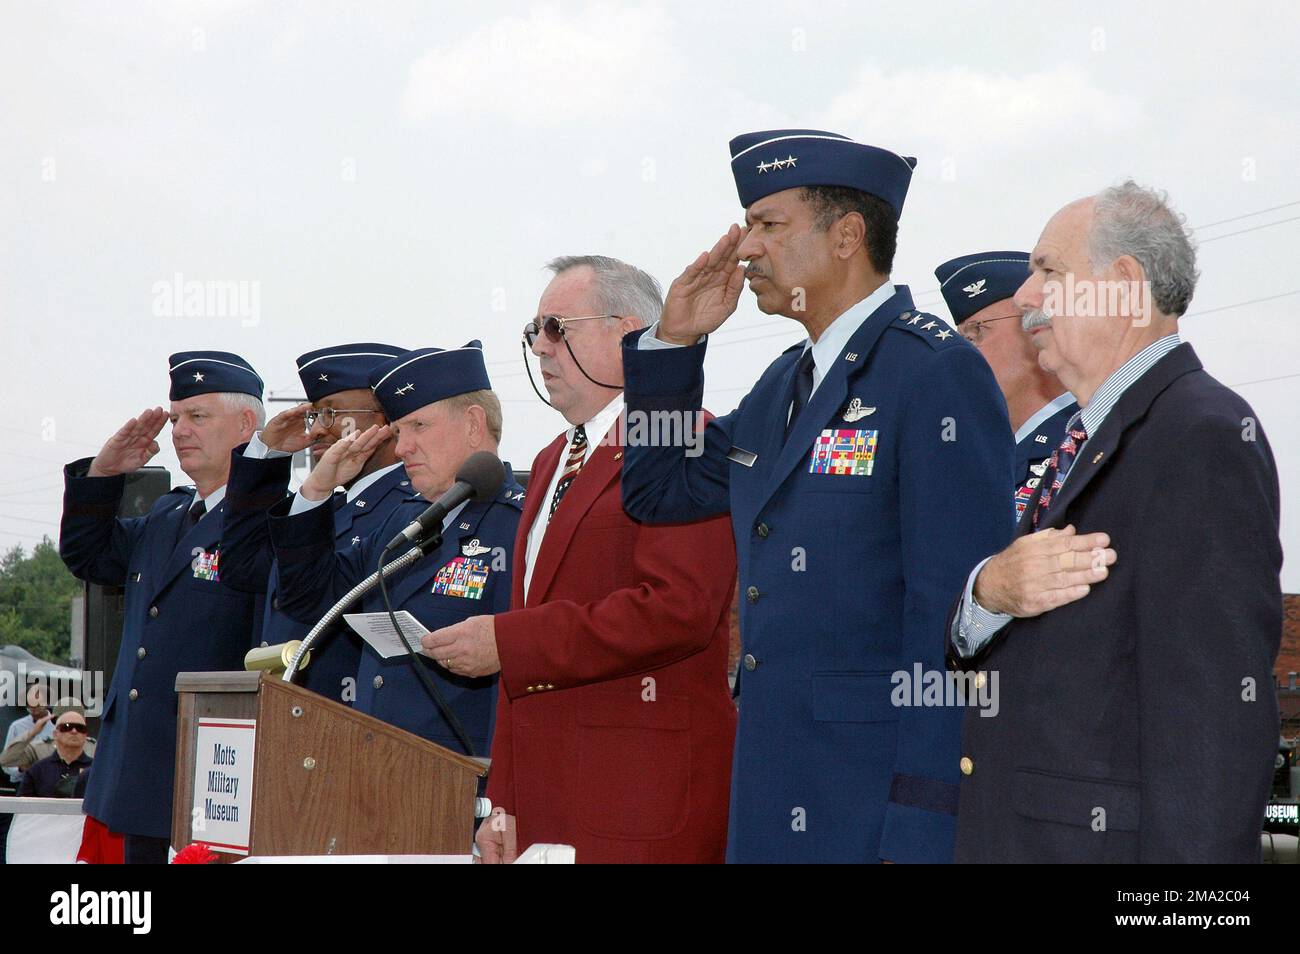 040718-F-4563N-028. [Complete] Scene Caption: These distinguished guests (Left to Right): Ohio Air National Guard (OHANG) Brigadier General (BGEN) Richard Green, Assistant Adjutant General (AG) for Air and Commander, OHANG; US Air Force (USAF) BGEN Vergel Lattimore, Chaplain and Air National Guard (ANG) assistant to the Air Force CHIEF of Chaplains; OHANG Major General (MGEN) John Smith, AG Ohio National Guard, Joint Force Headquarters (JF HQ); Mr. Jan Maroscher (singing the US National Anthem); USAF Lieutenant General (LGEN) Daniel James, III, Director of the US ANG; USAF (ret.) Colonel (COL) Stock Photo